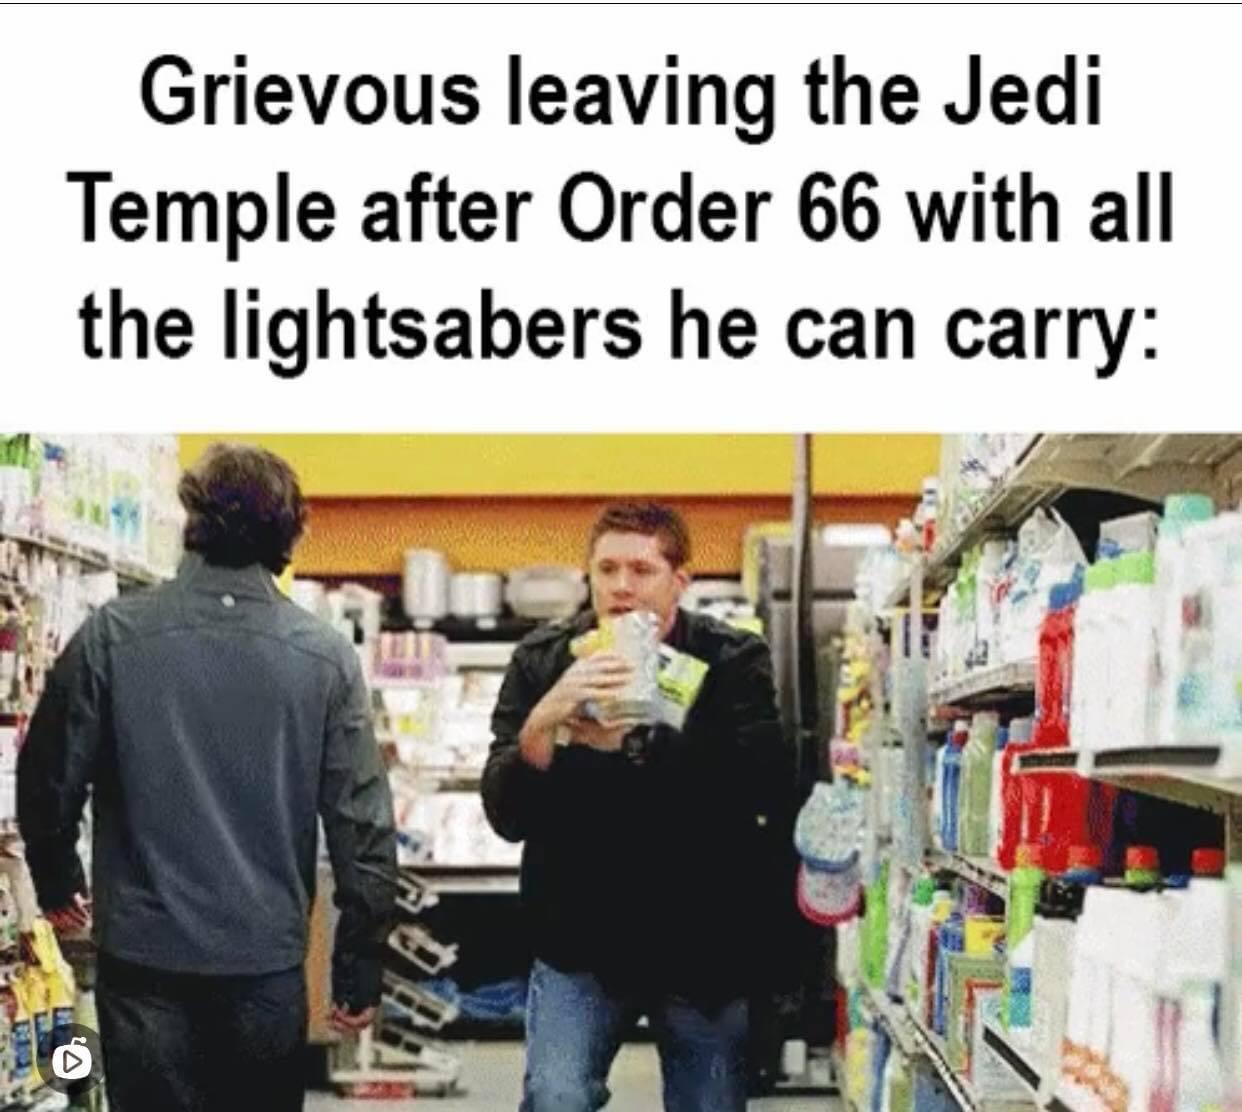 funny memes - create - Grievous leaving the Jedi Temple after Order 66 with all the lightsabers he can carry